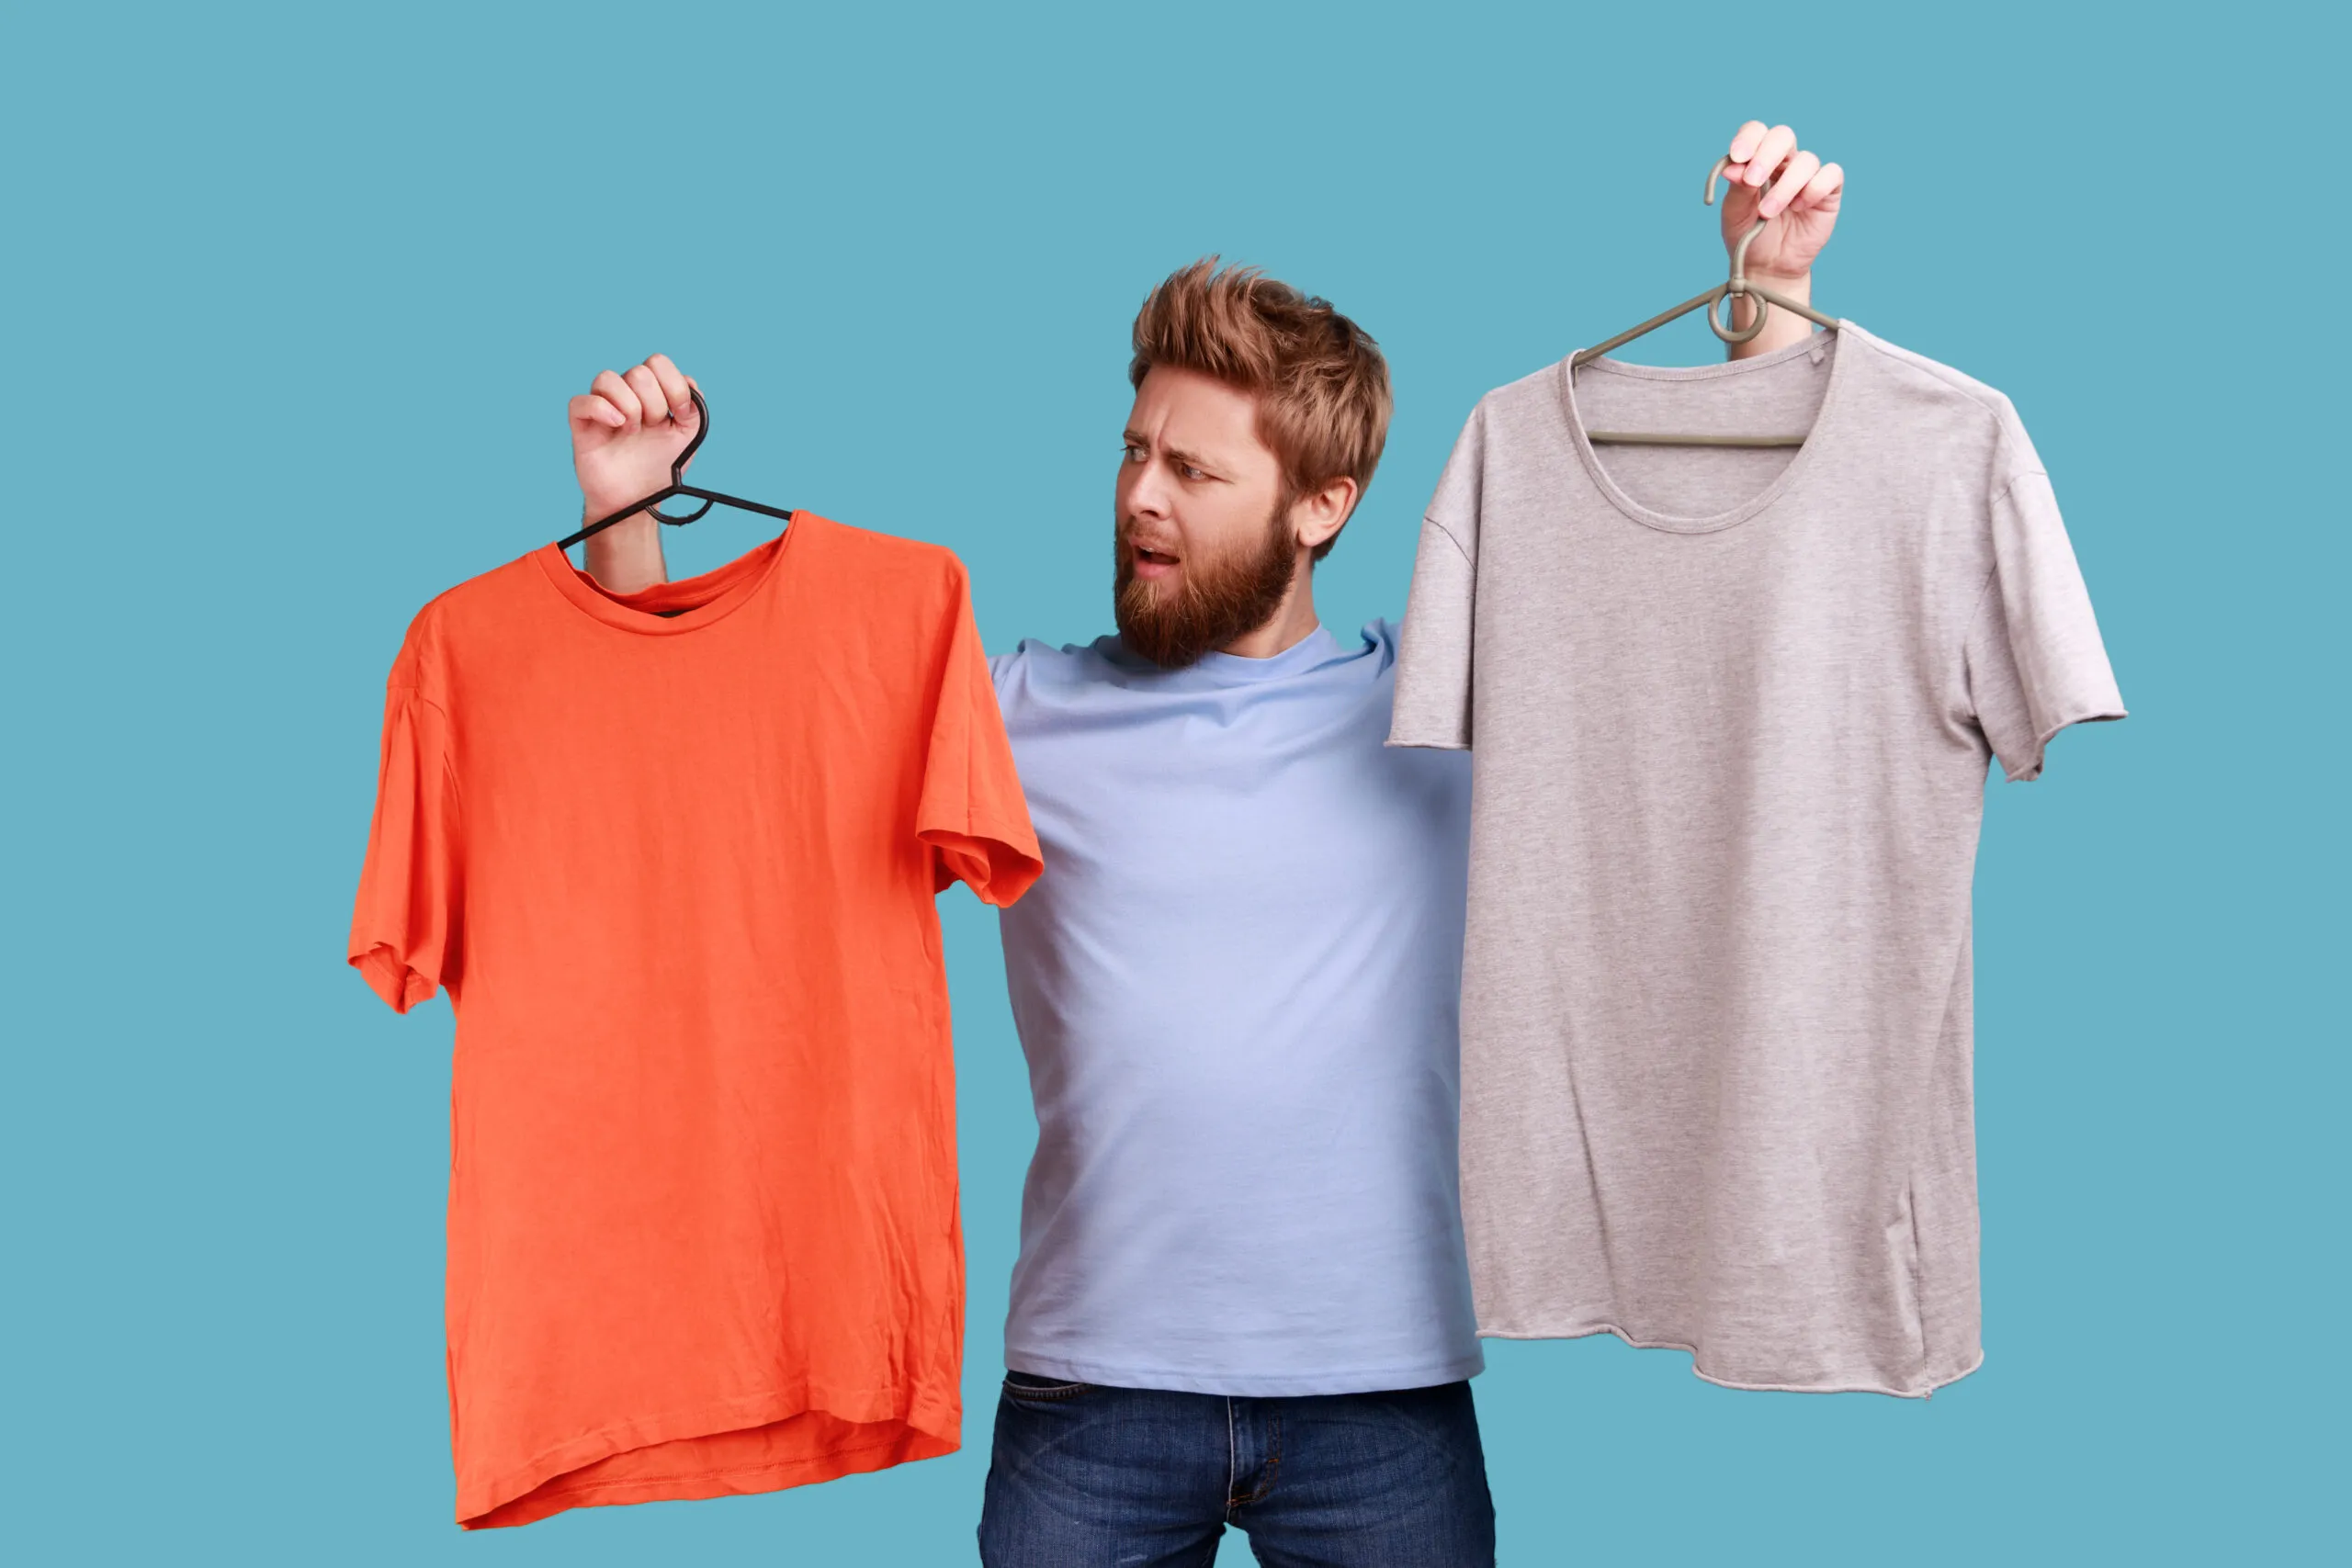 Man frowning face holding two hangers with gray and orange T-shirts, hard to choose the best attire.